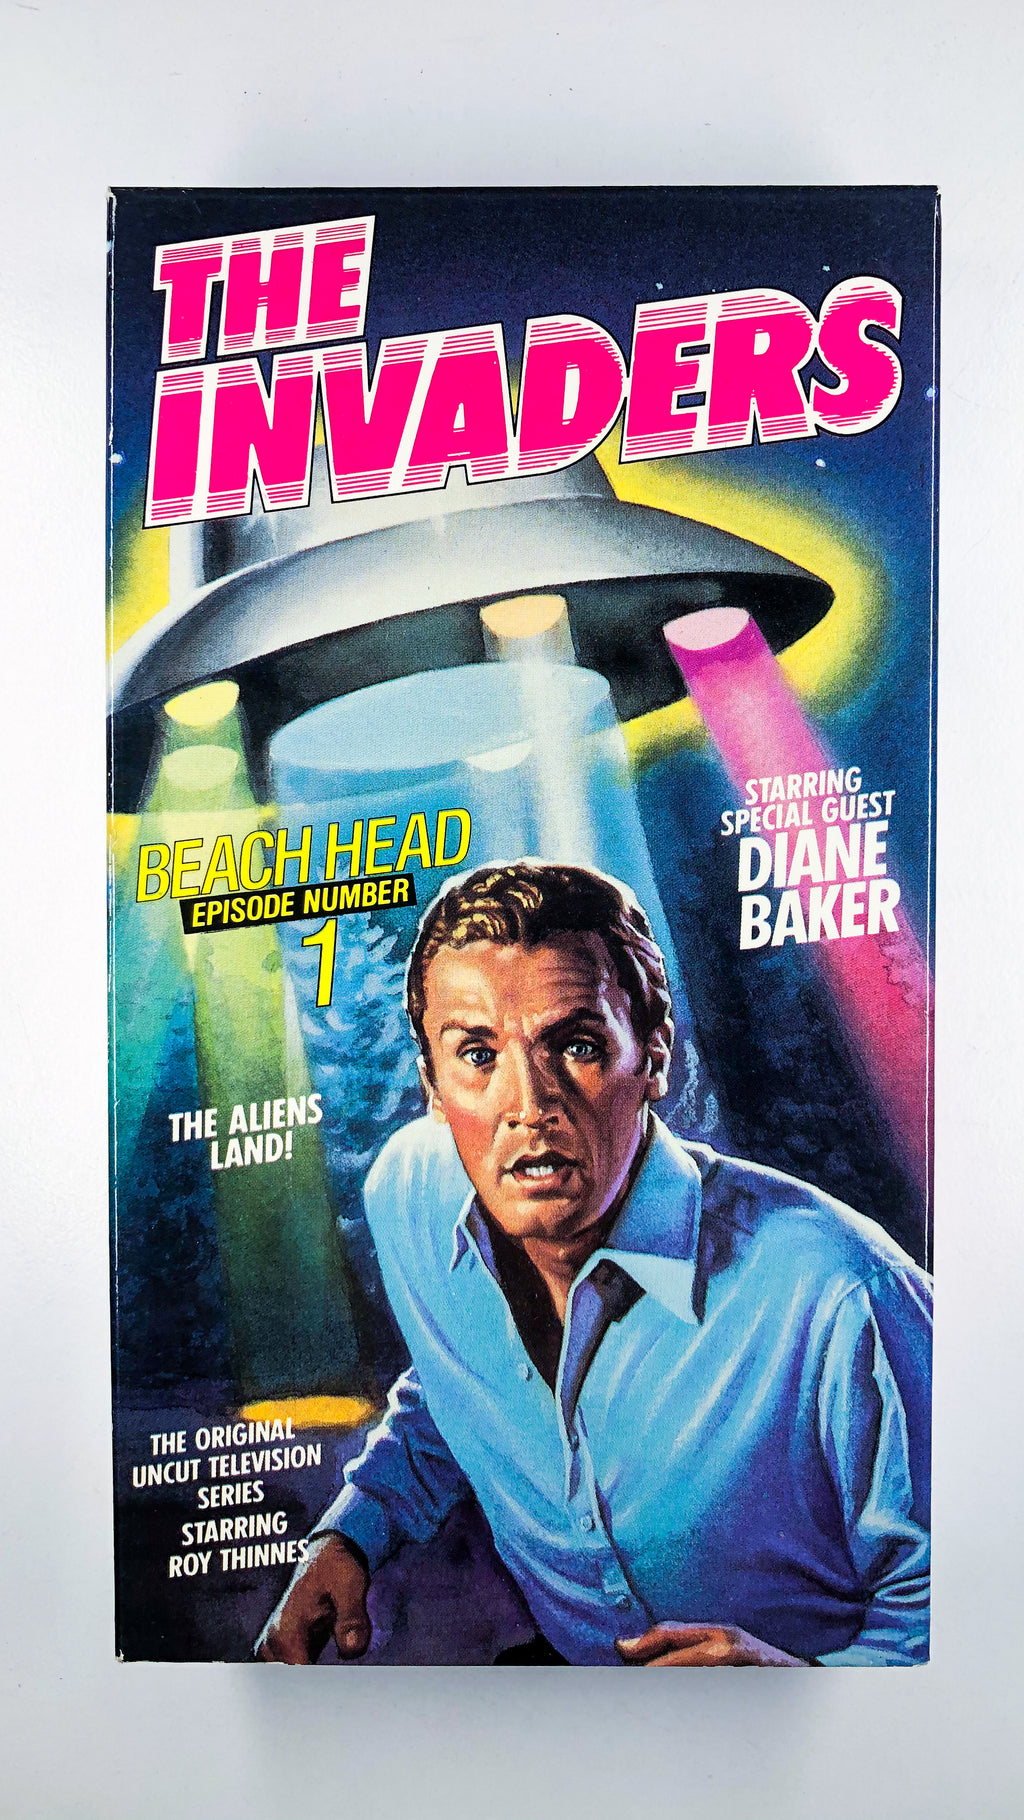 The Invaders: Episode 1: "Beach Head"